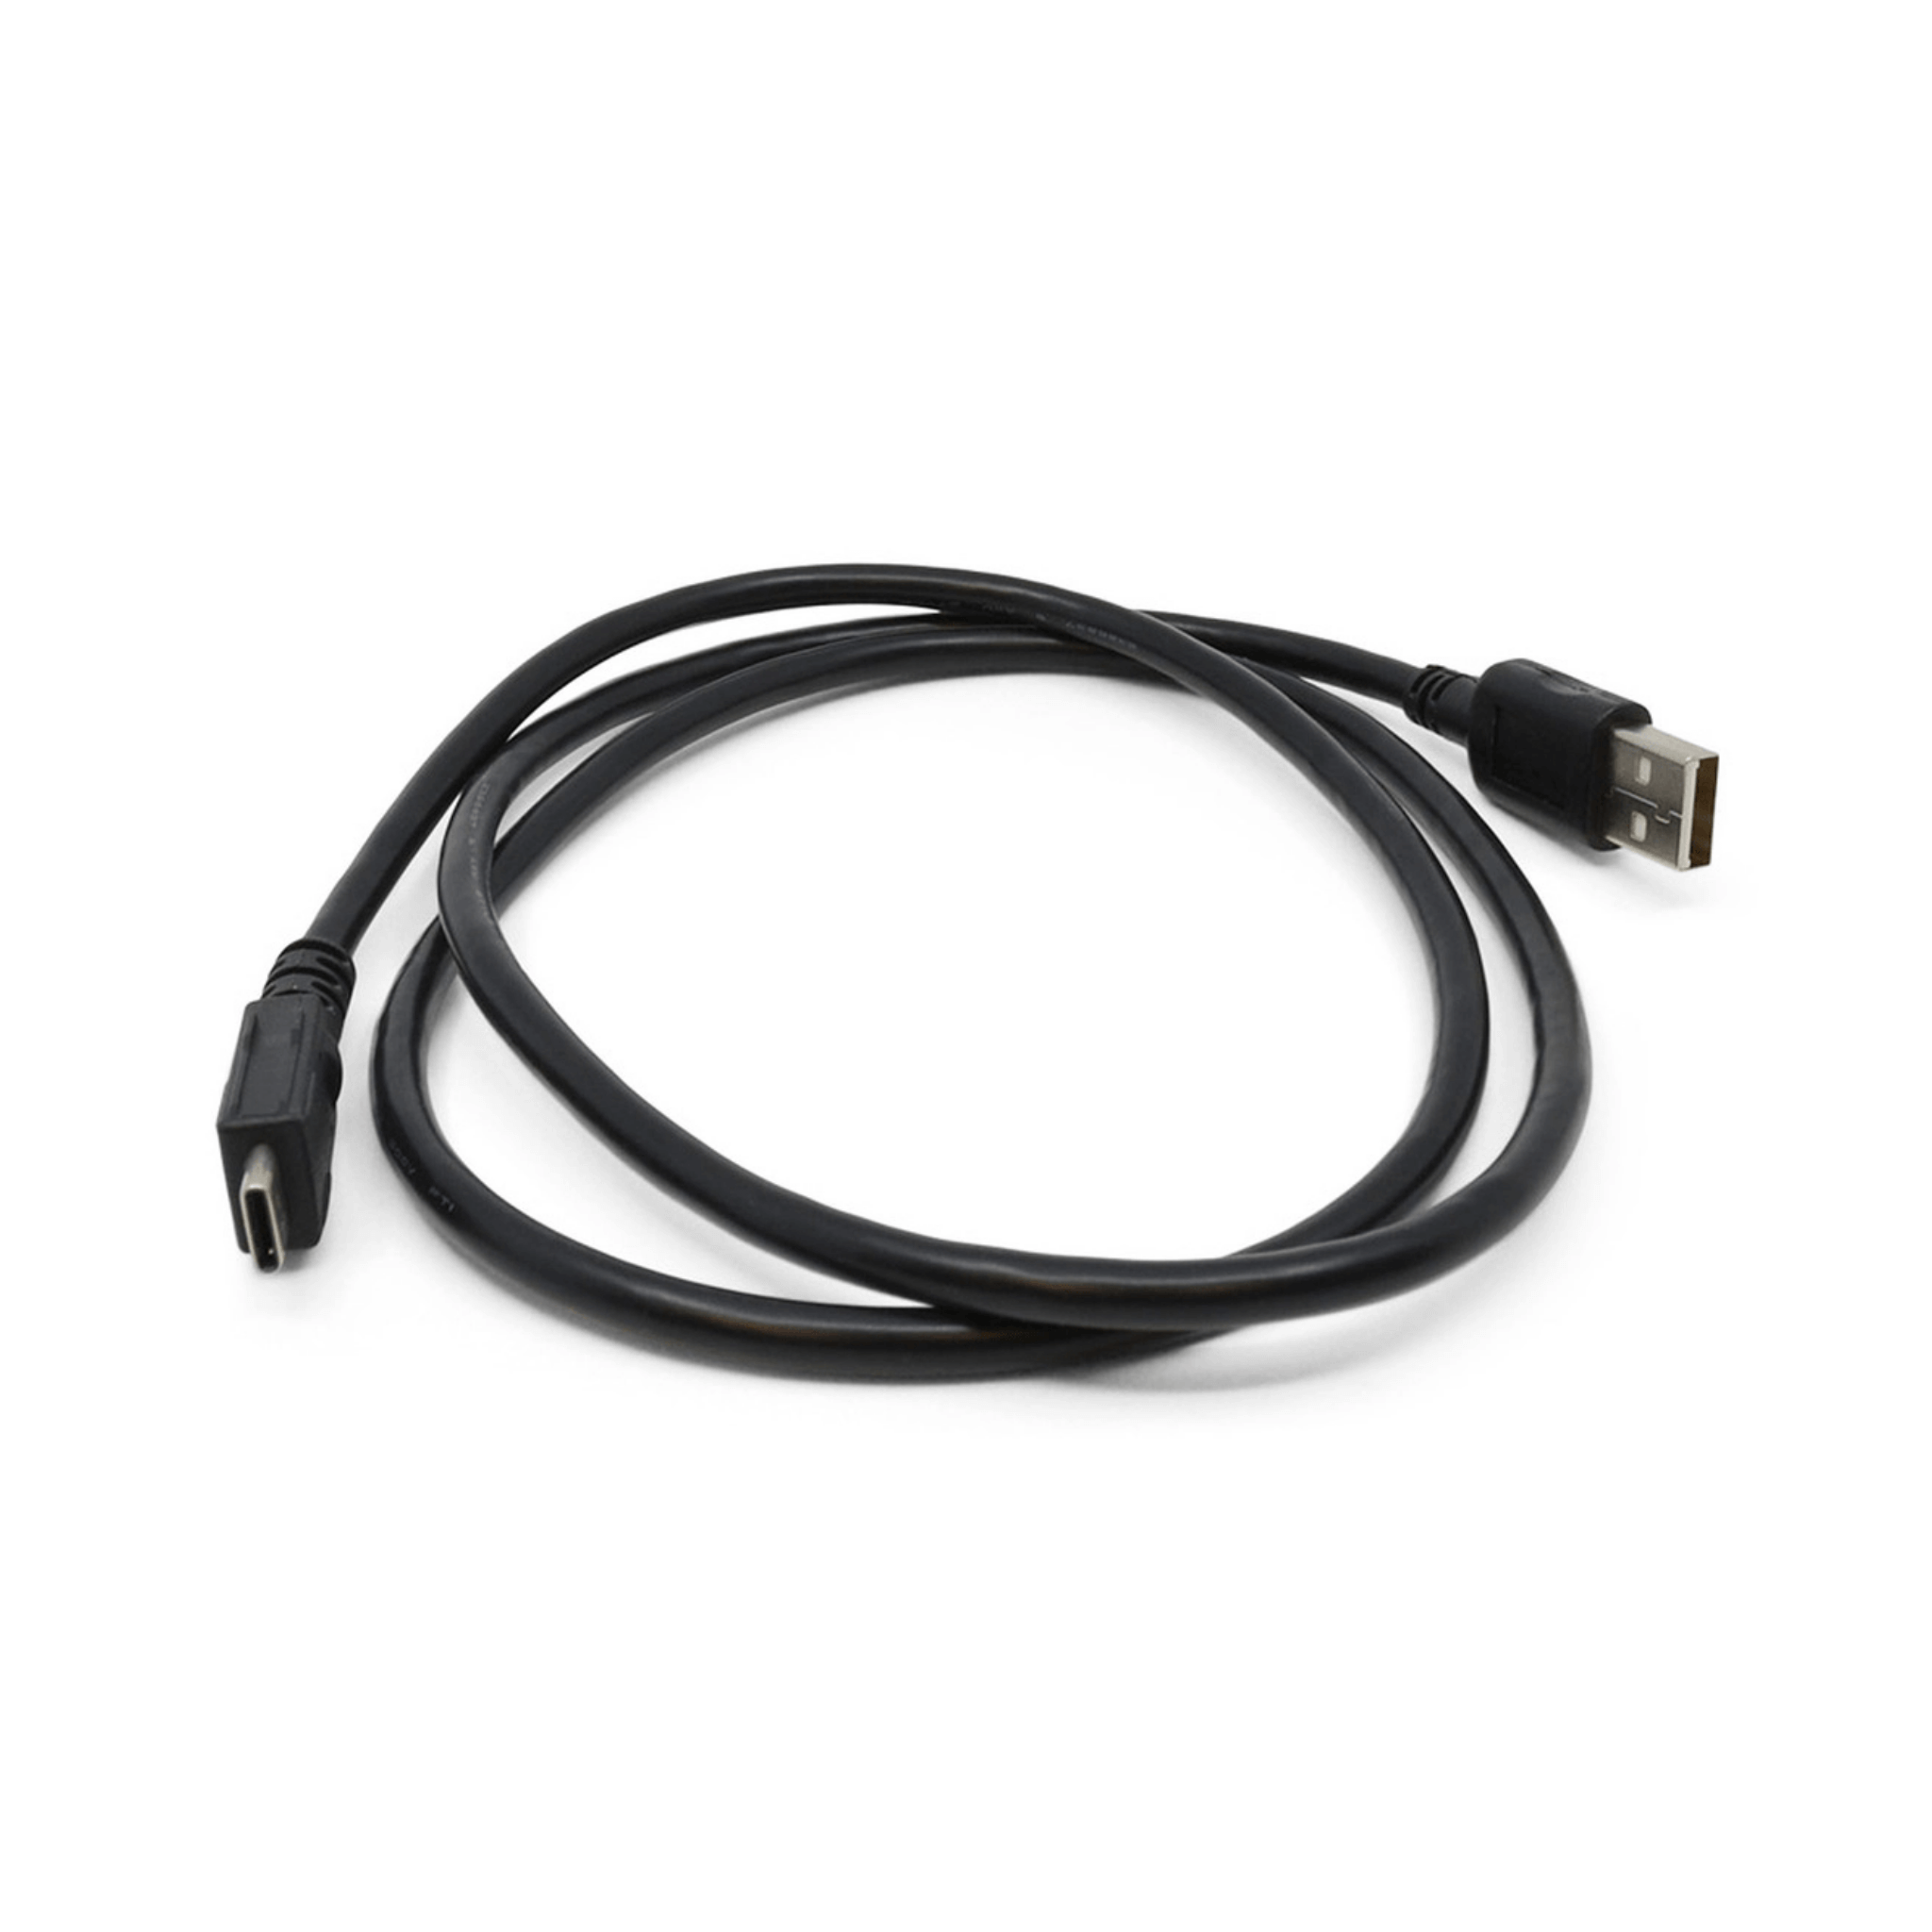 Zebra USB C to USB A Cable